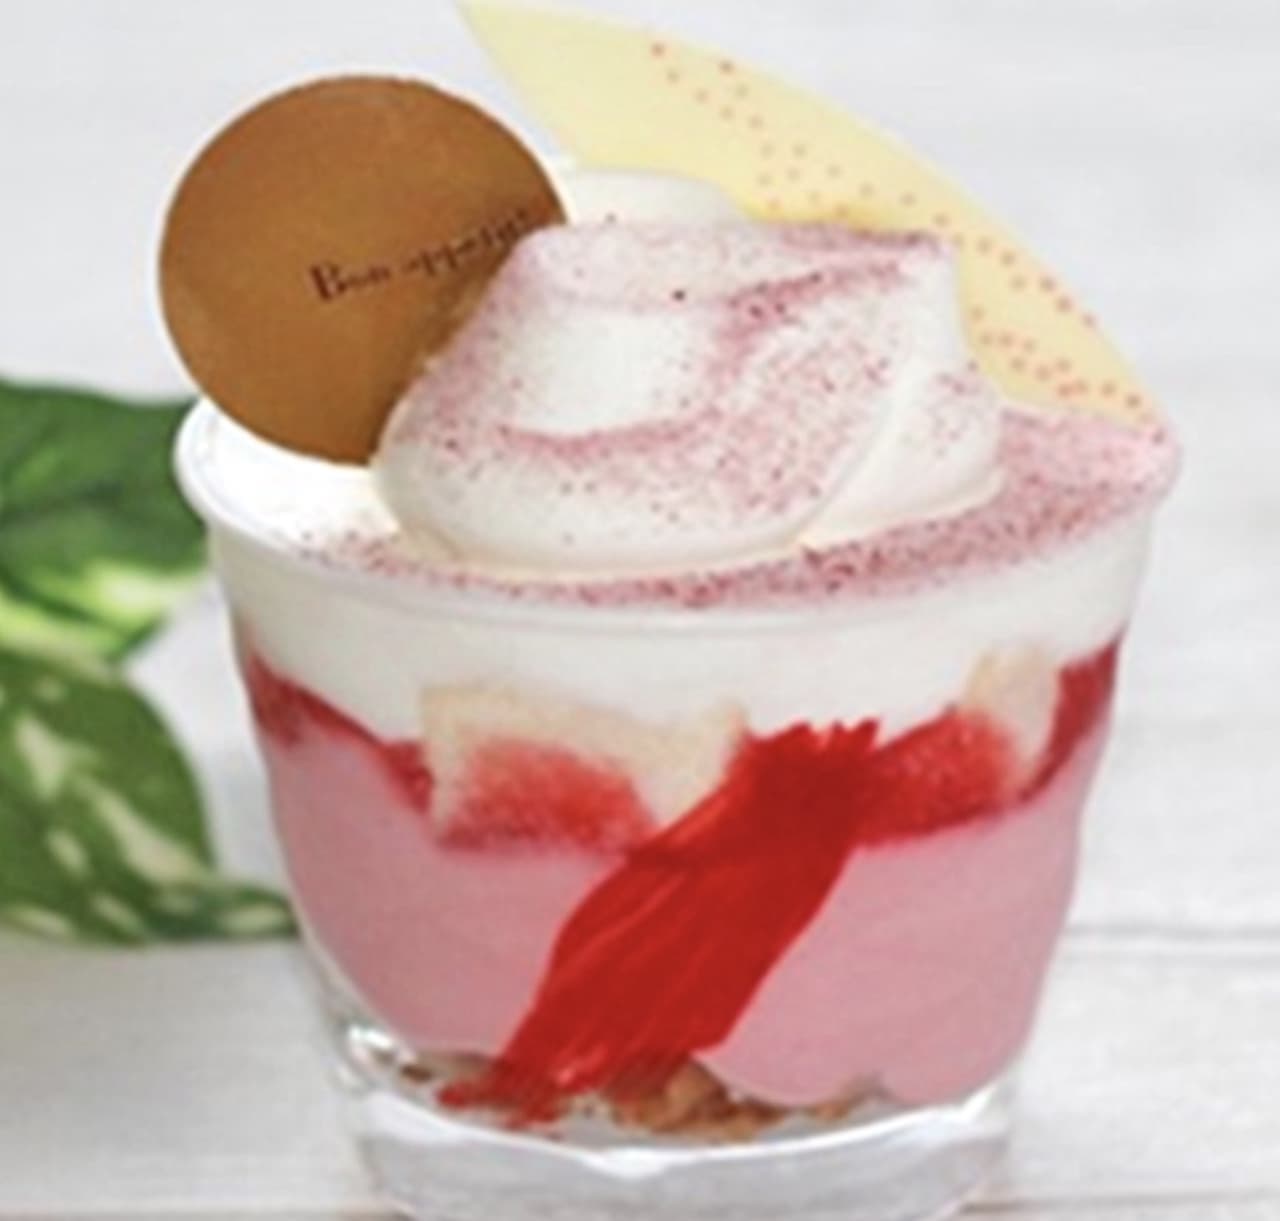 Chateraise "Strawberry and White Chocolate Cup Dessert with Pure Fresh Cream from Hokkaido